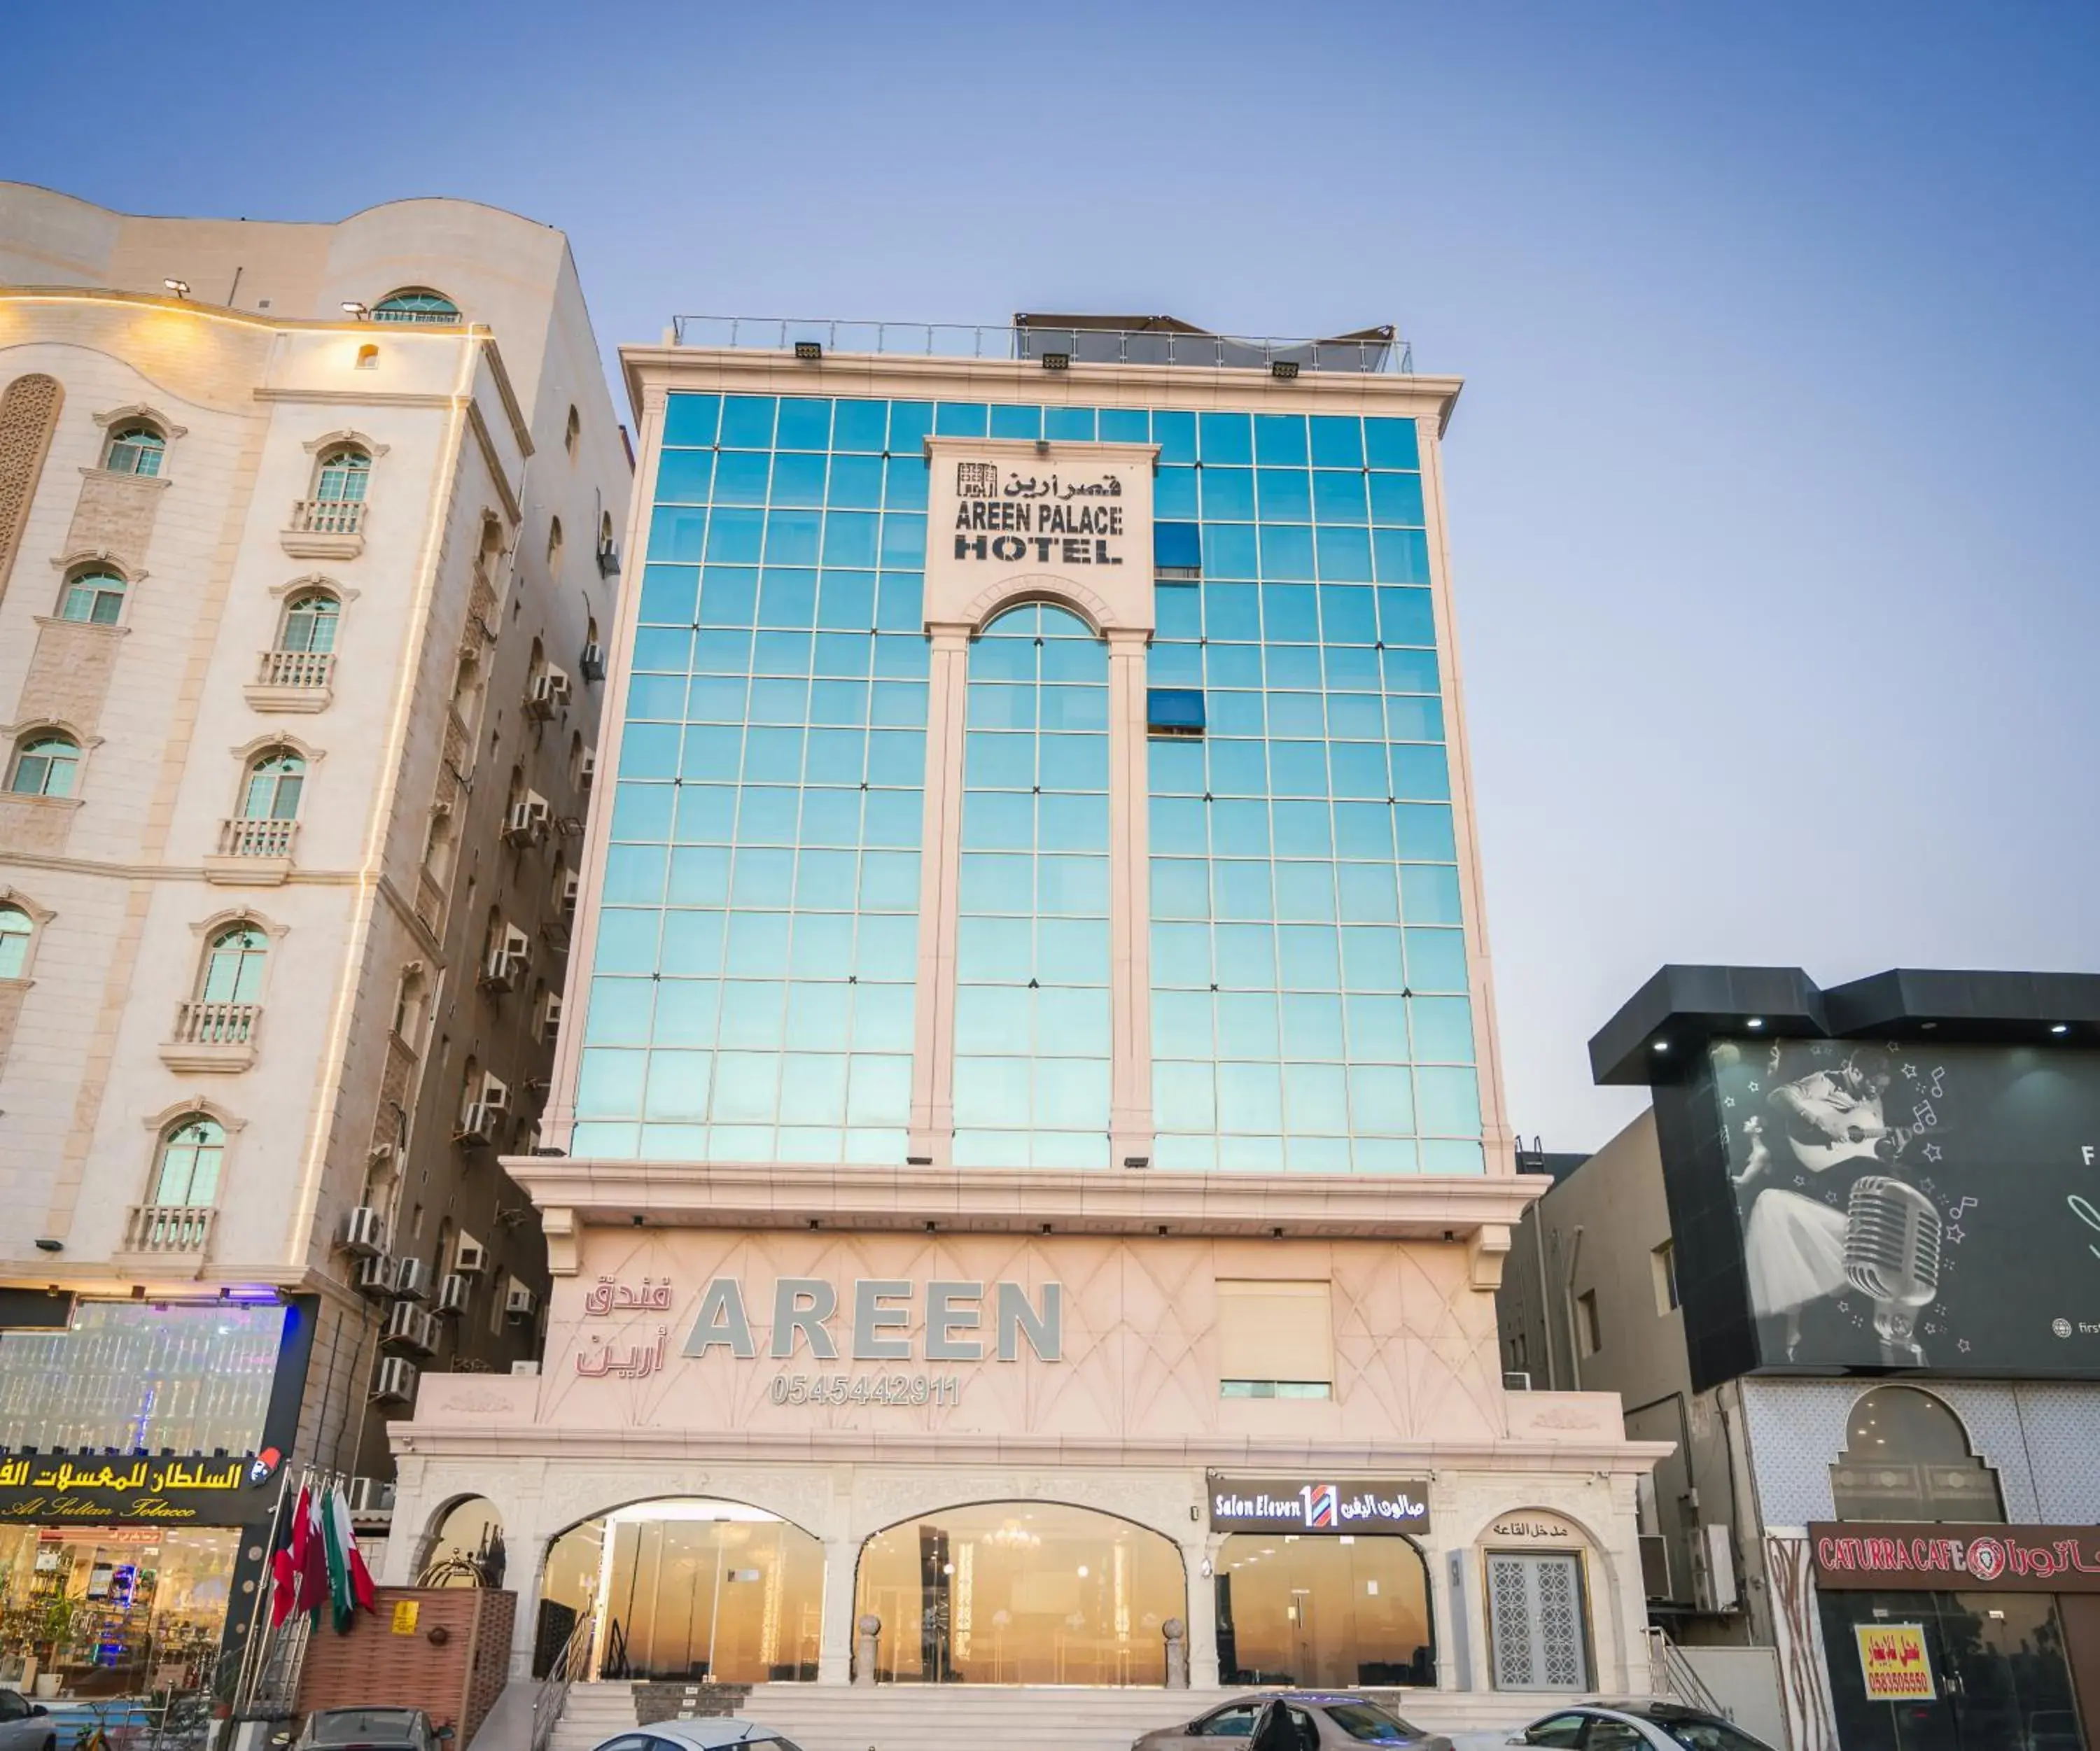 Property Building in Areen Hotel